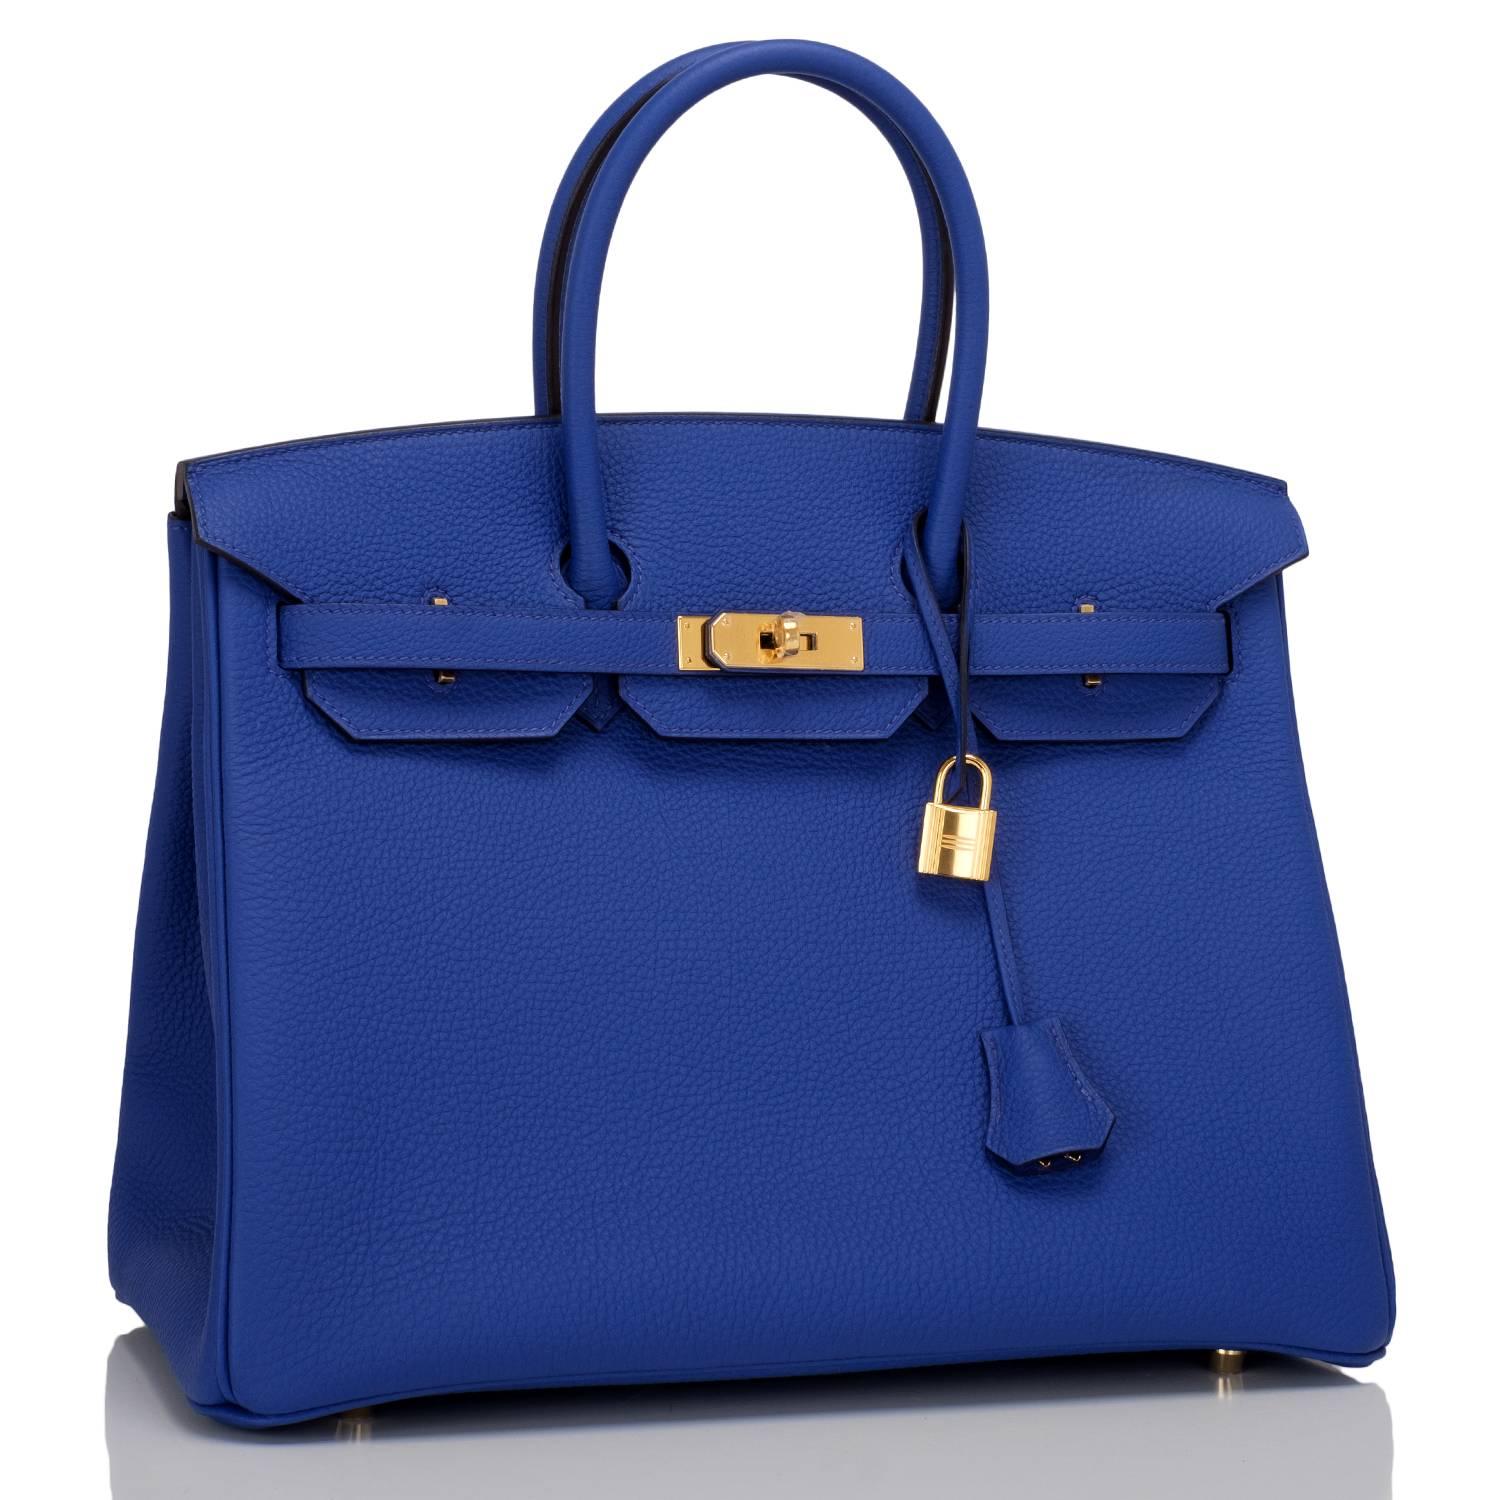 Hermes Blue Electric Birkin 35cm in togo leather with gold hardware.

This Birkin features tonal stitching, front toggle closure, clochette with lock and two keys, and double rolled handles. Interior is lined in Blue Electric chevre with one zip